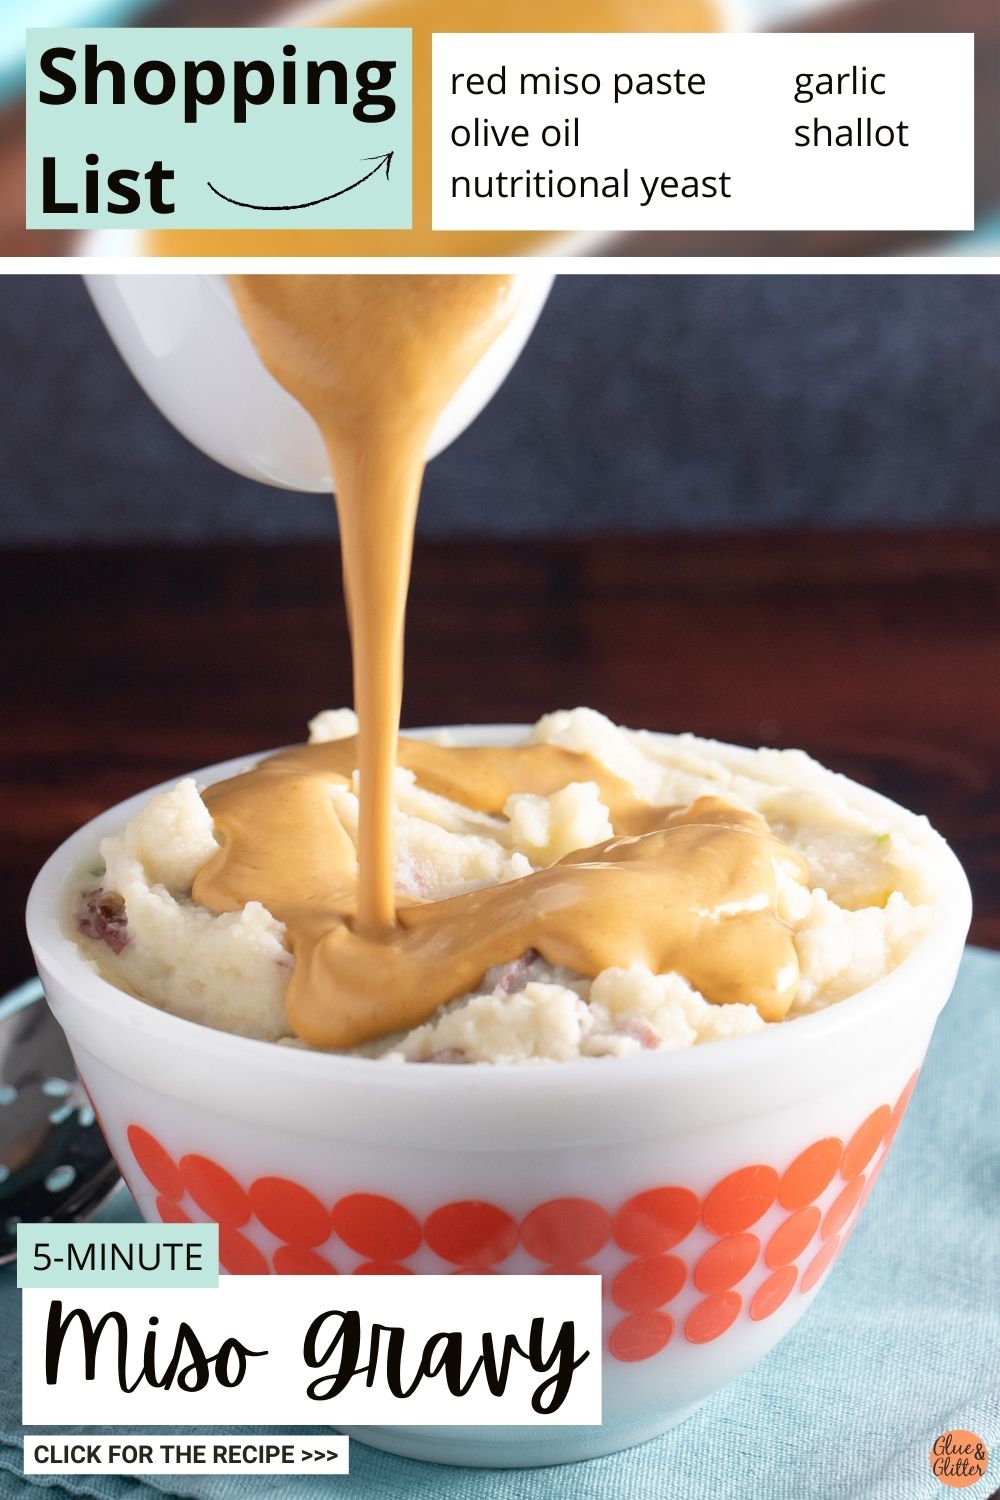 image collage of pouring miso gravy over cauliflower mashed potatoes and a list of the ingredients labeled "Shopping List"